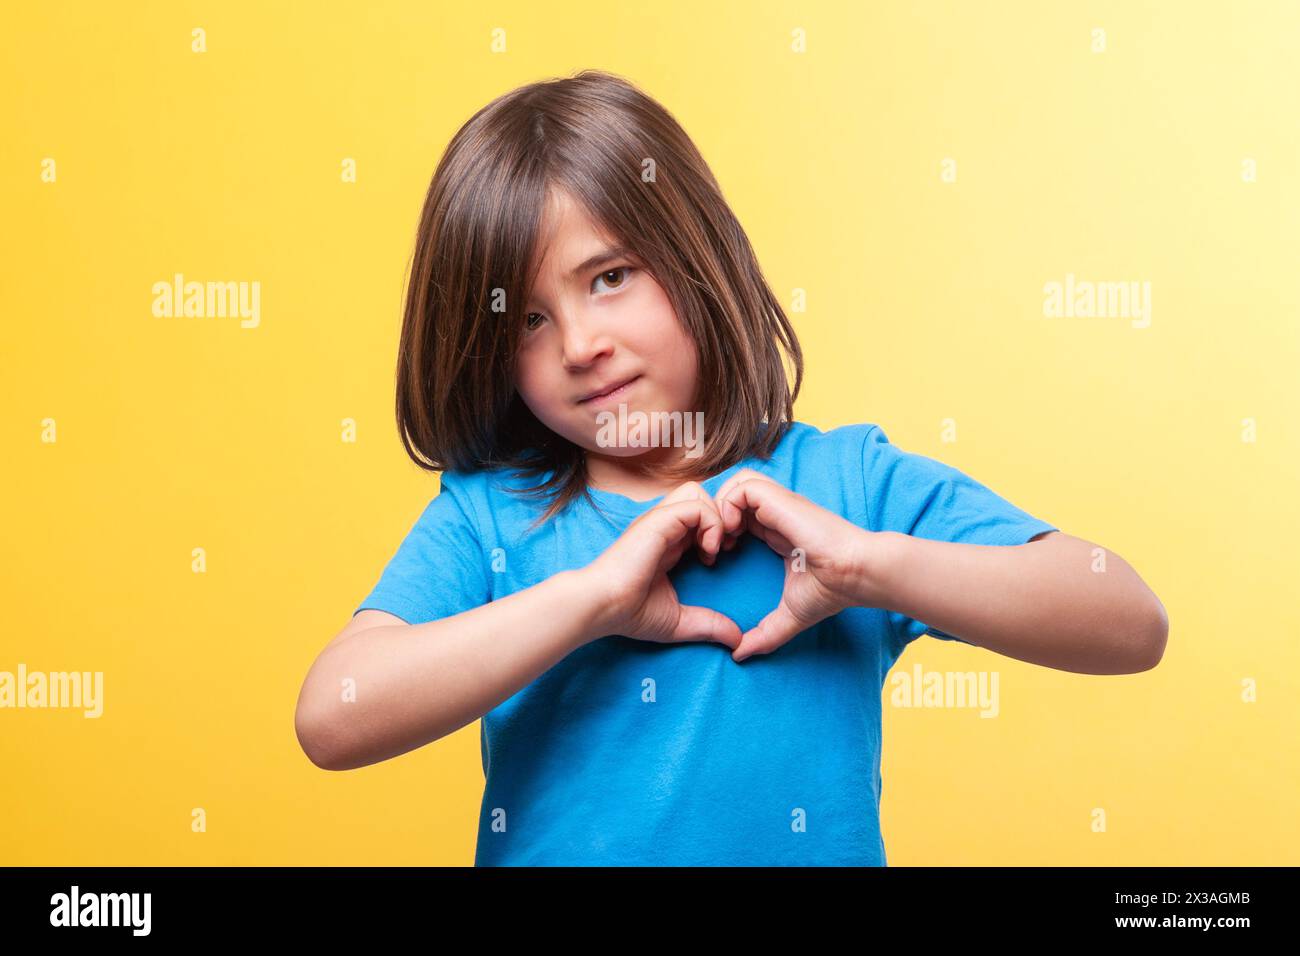 Boy with blue t-shirt and long brown hair makes the shape of a heart with his hands next to his chest while looking at the camera. Stock Photo